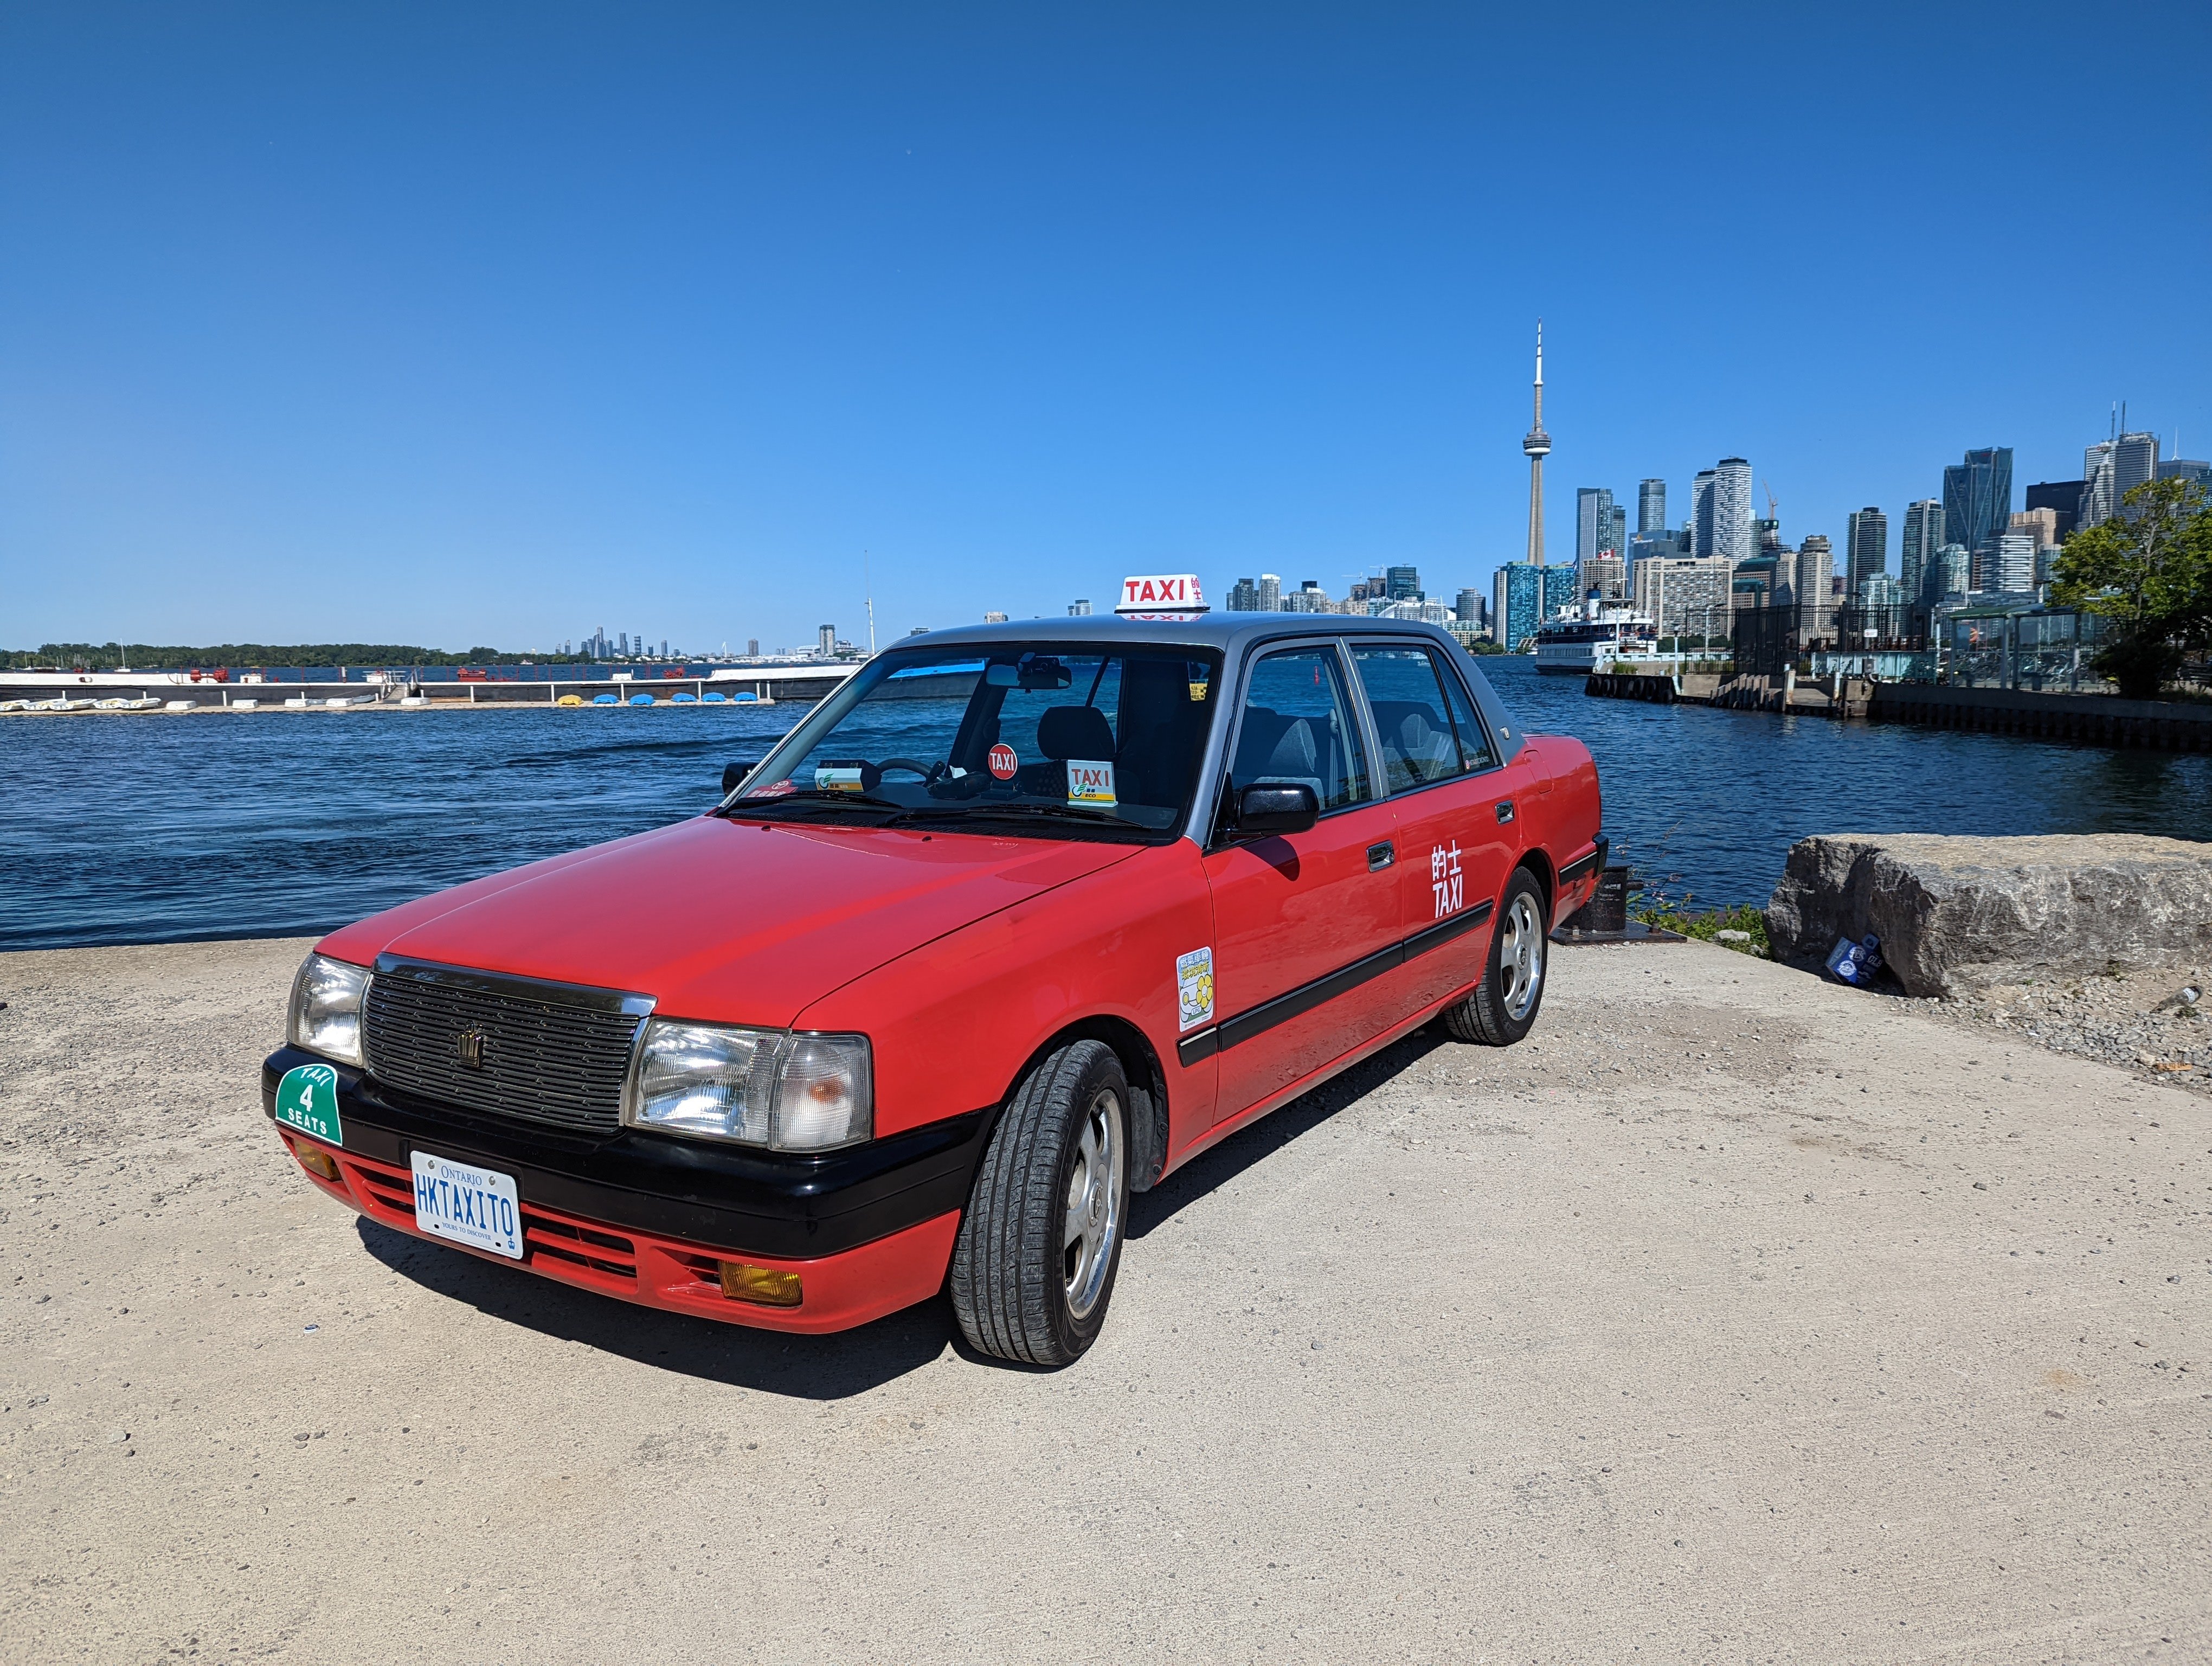 Realtor Alan Wu’s 1997 Toyota Crown Comfort with the Toronto skyline in the background. He bought the Toyota Crown Comfort, once used in the movie Pacific Rim as a prop, refurbished it and added additional components such as a fare meter to make it look more realistic. Photo:  Alan Wu